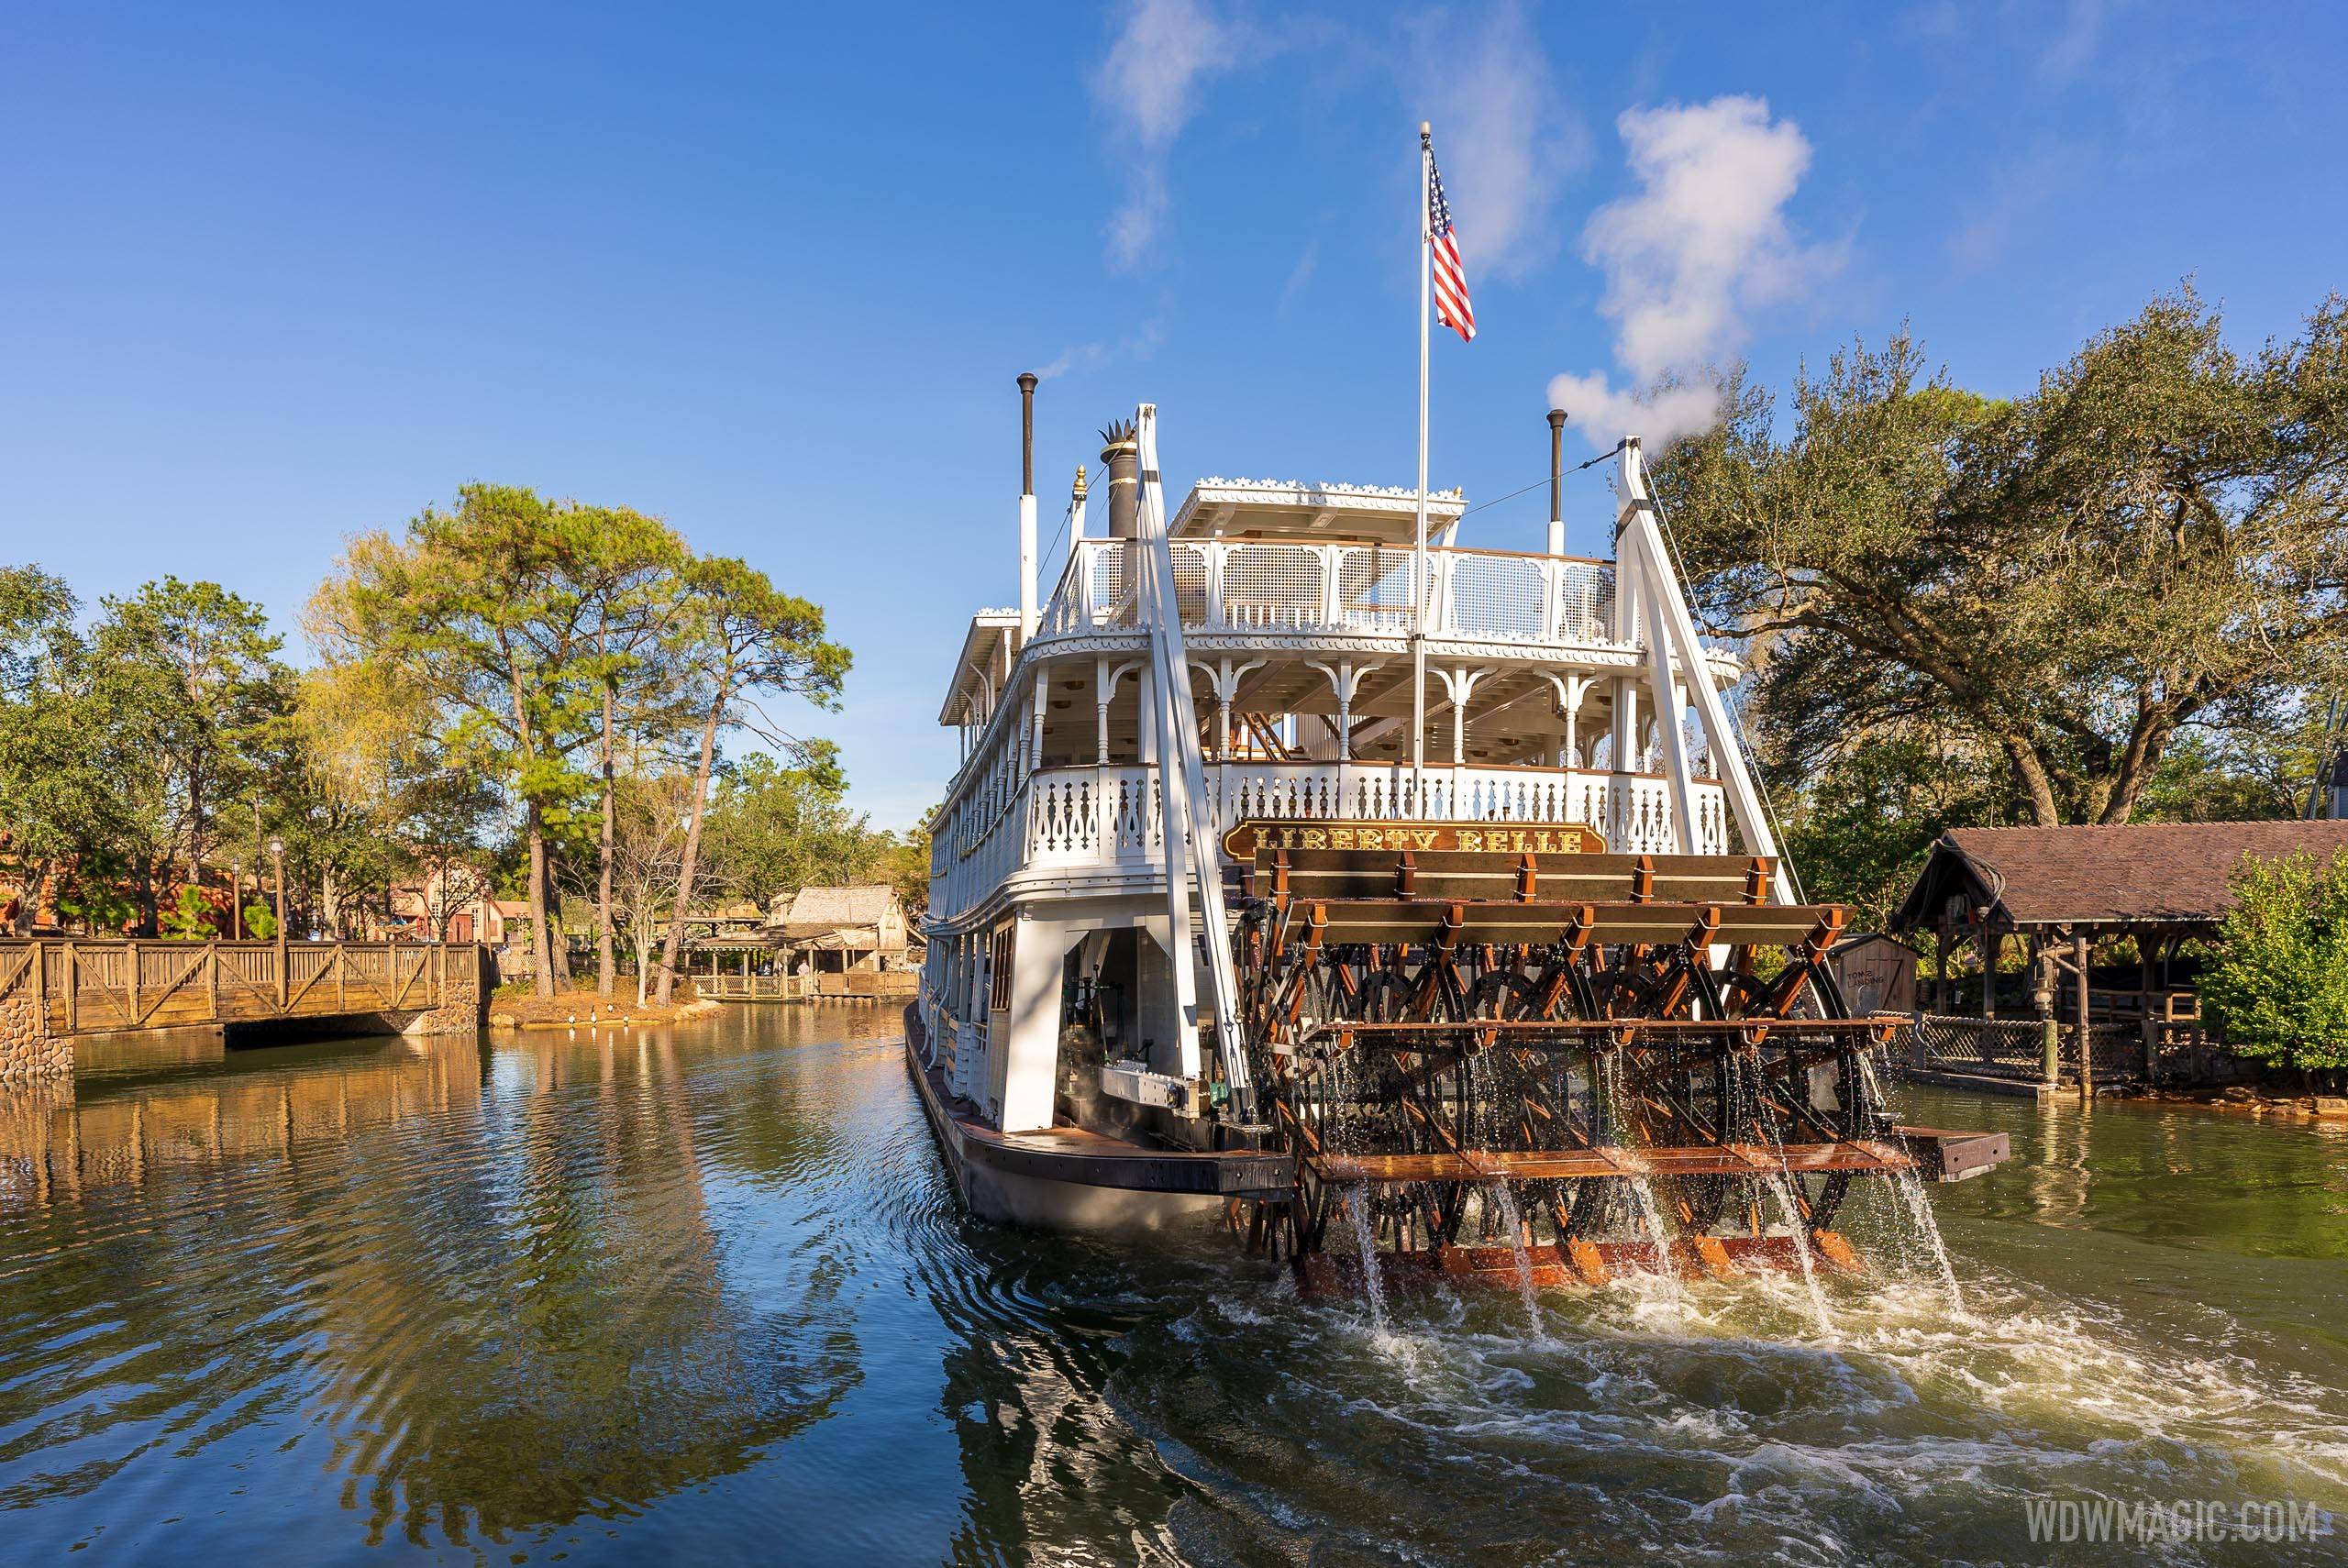 VIDEO - Liberty Belle returns to the Rivers of America